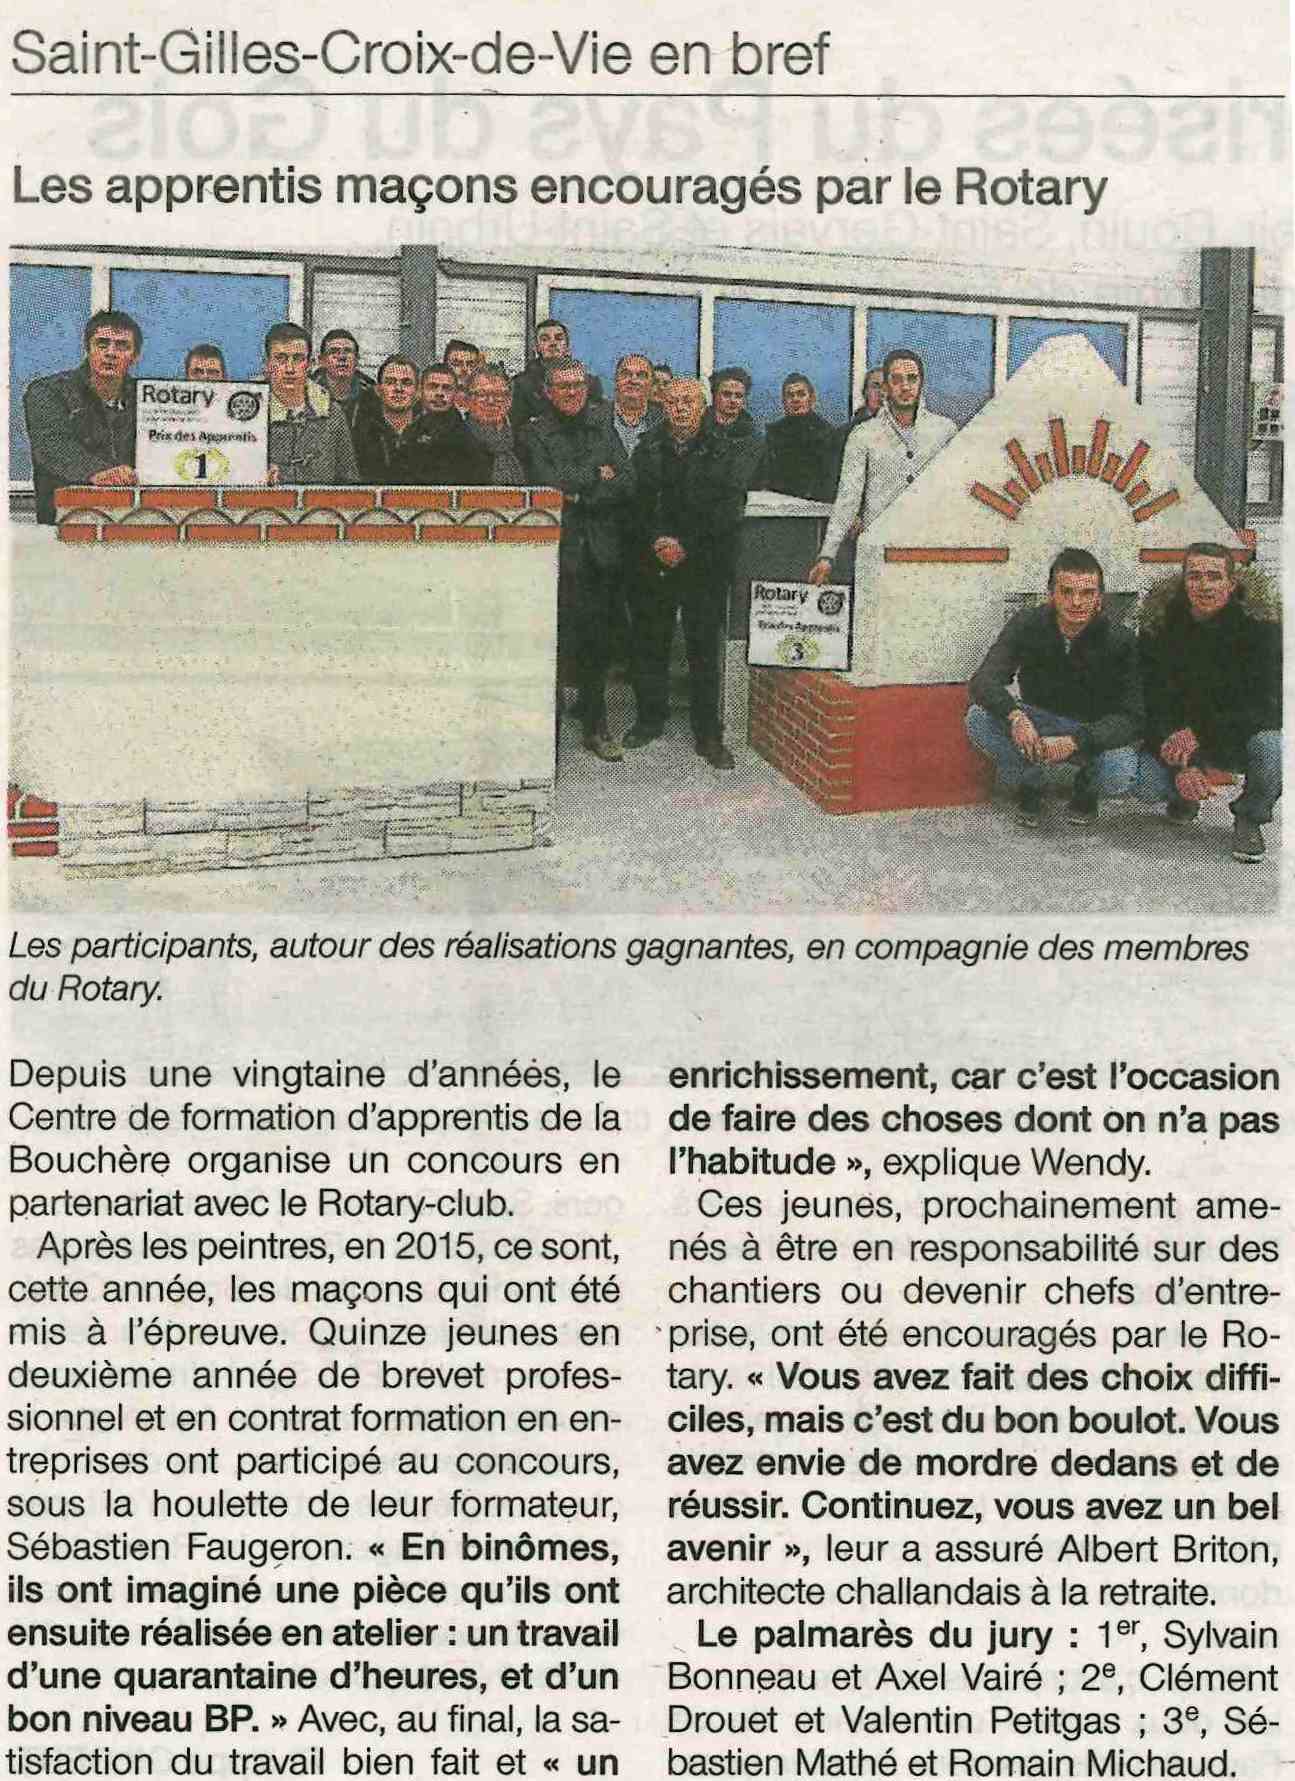 ouest france 31-01-16